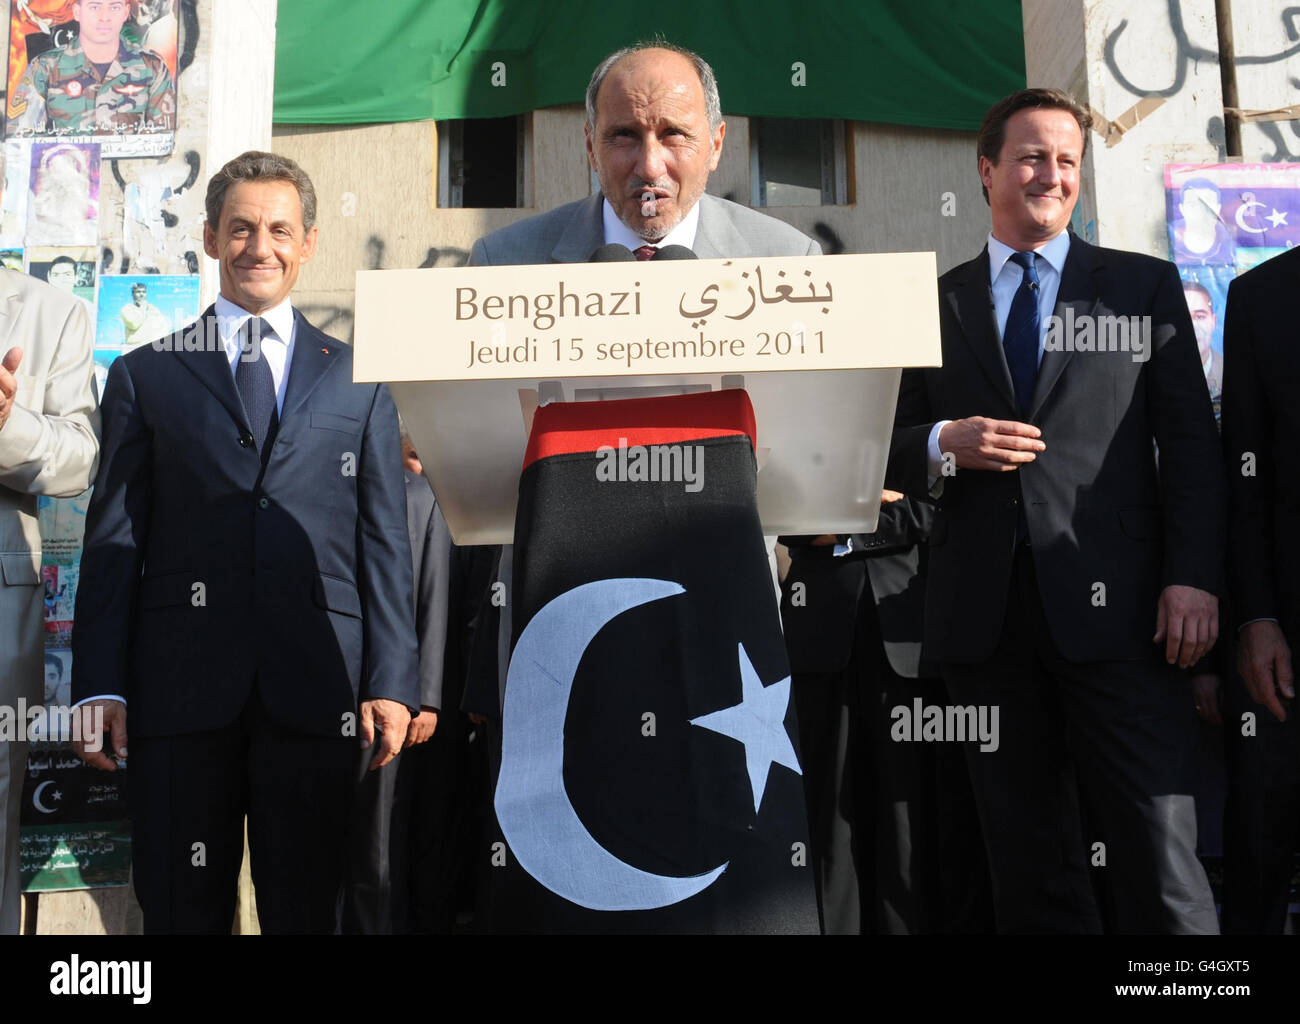 Leader of Libya's interim government, Mustafa Abdul-Jalil makes a speech flanked by French President Nicholas Sarkozy and Prime Minister David Cameron during their visit to Benghazi. Stock Photo